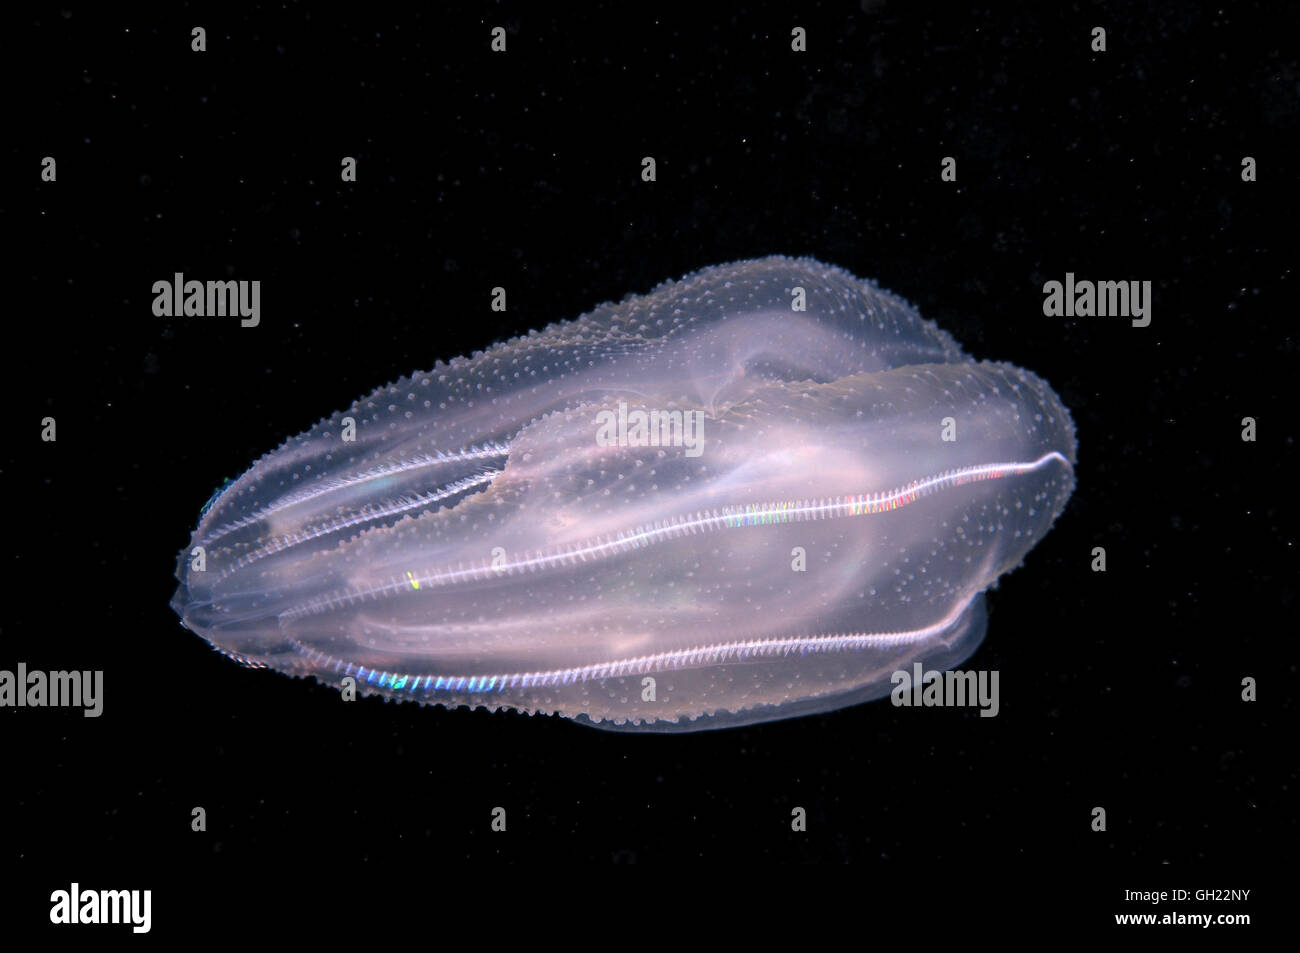 Sea Walnut, American comb jelly, Warty comb jelly or Leidy's comb jelly  (Mnemiopsis leidyi) Black Sea Stock Photo - Alamy